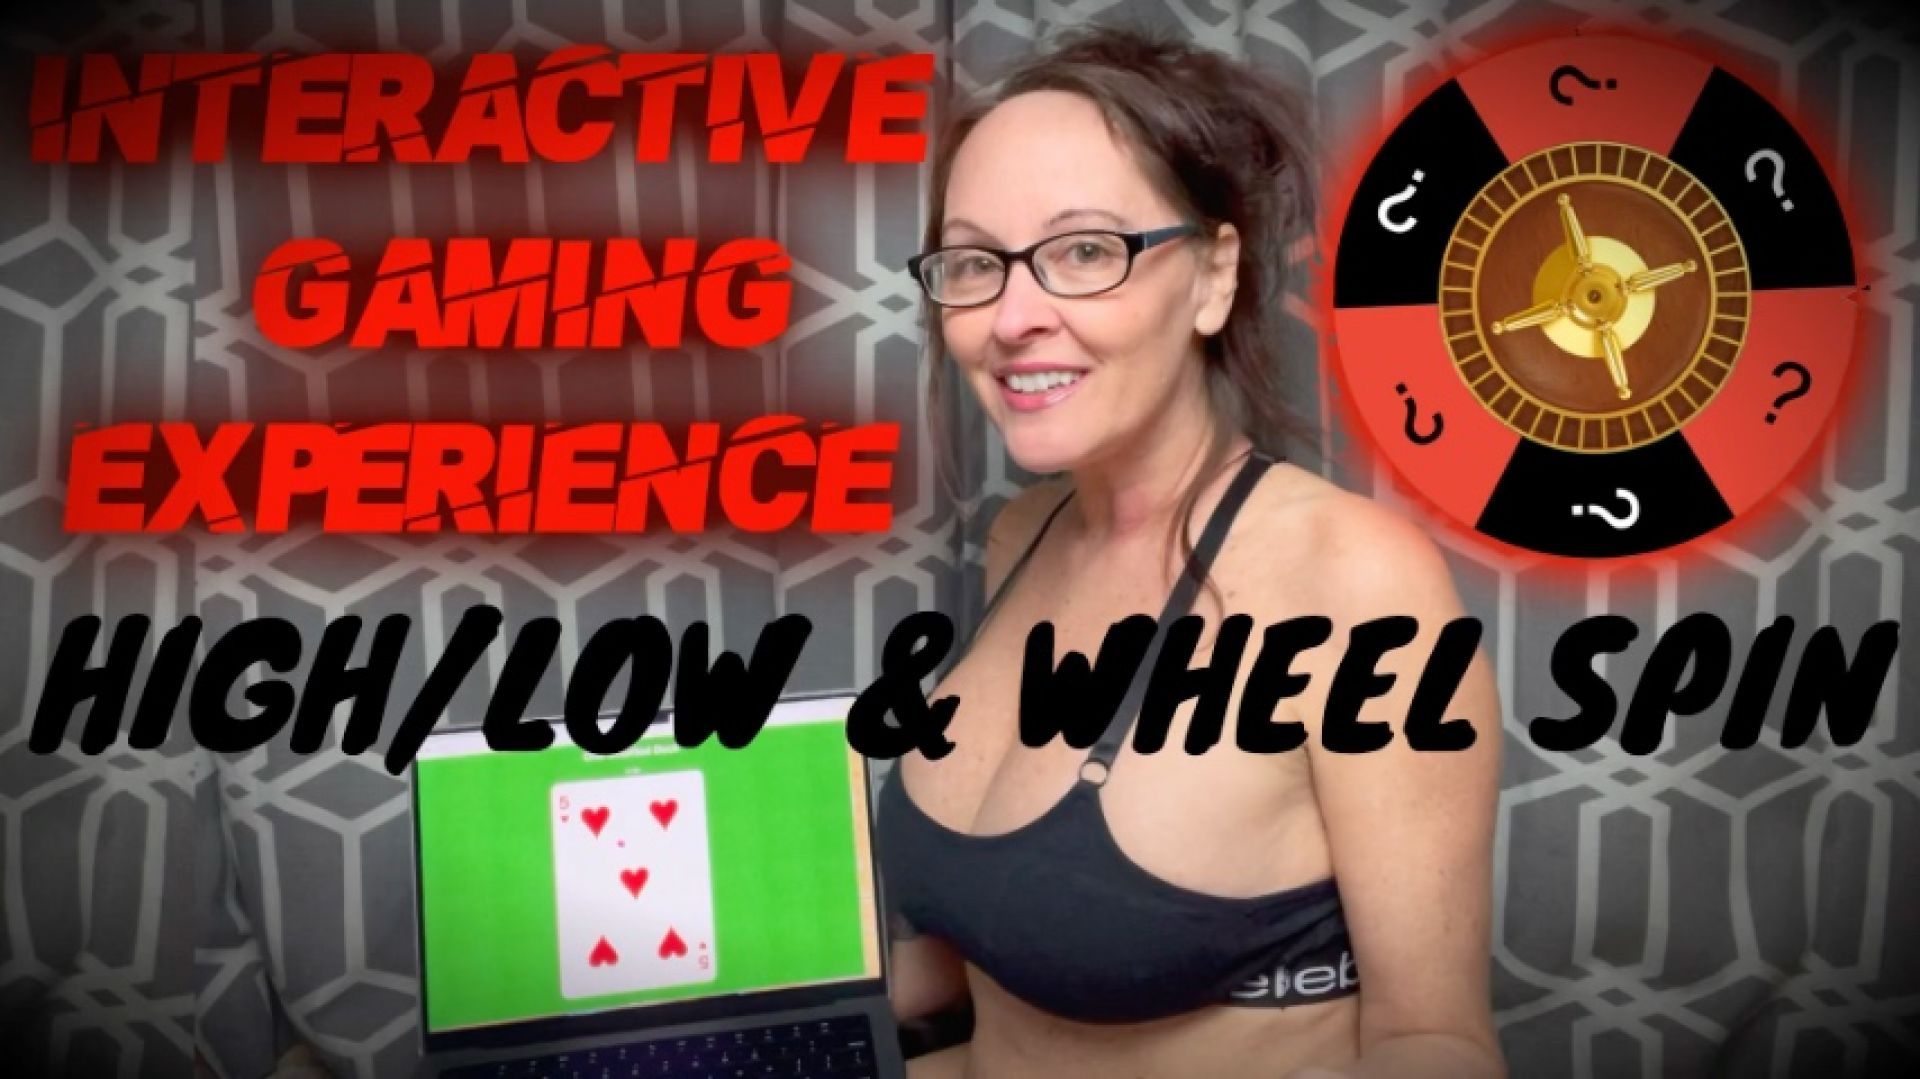 Interactive High Low and Wheel Spinning Game -female dominat